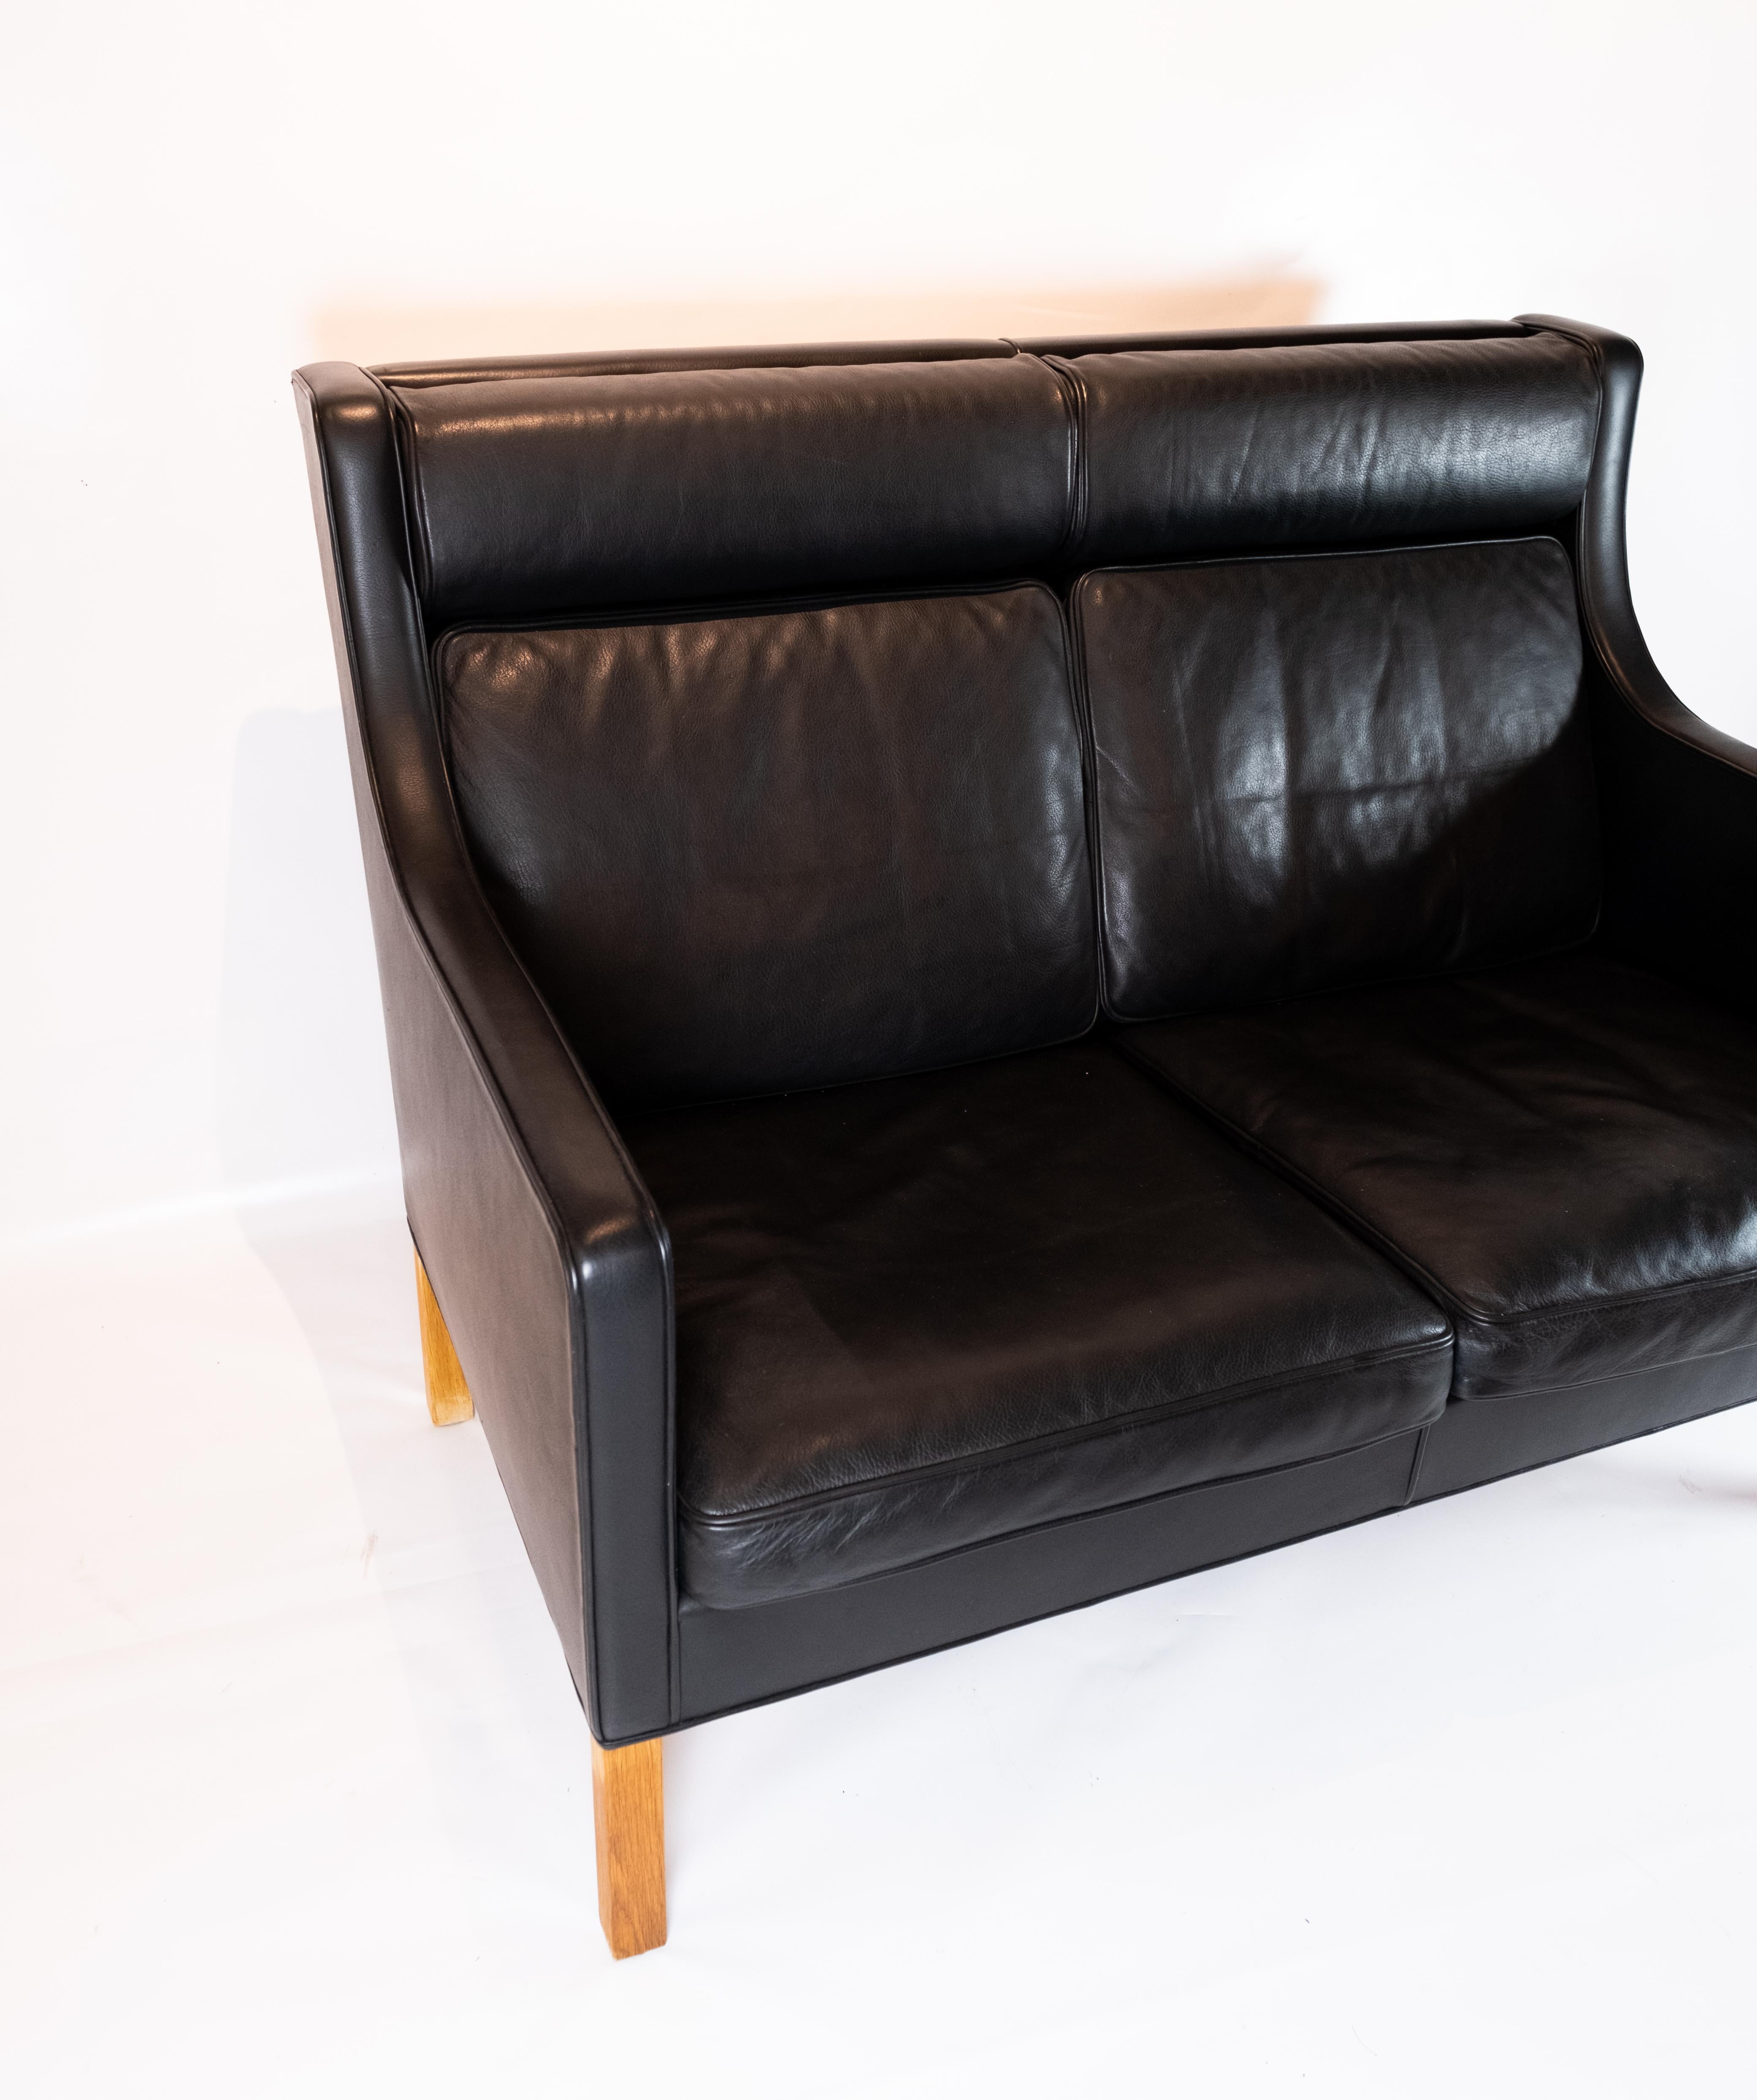 Kupe 2-seat sofa, model 2192, designed by Børge Mogensen in 1971 and manufactured by Fredericia Furniture. The sofa is upholstered with black leather and is in great vintage condition.
  